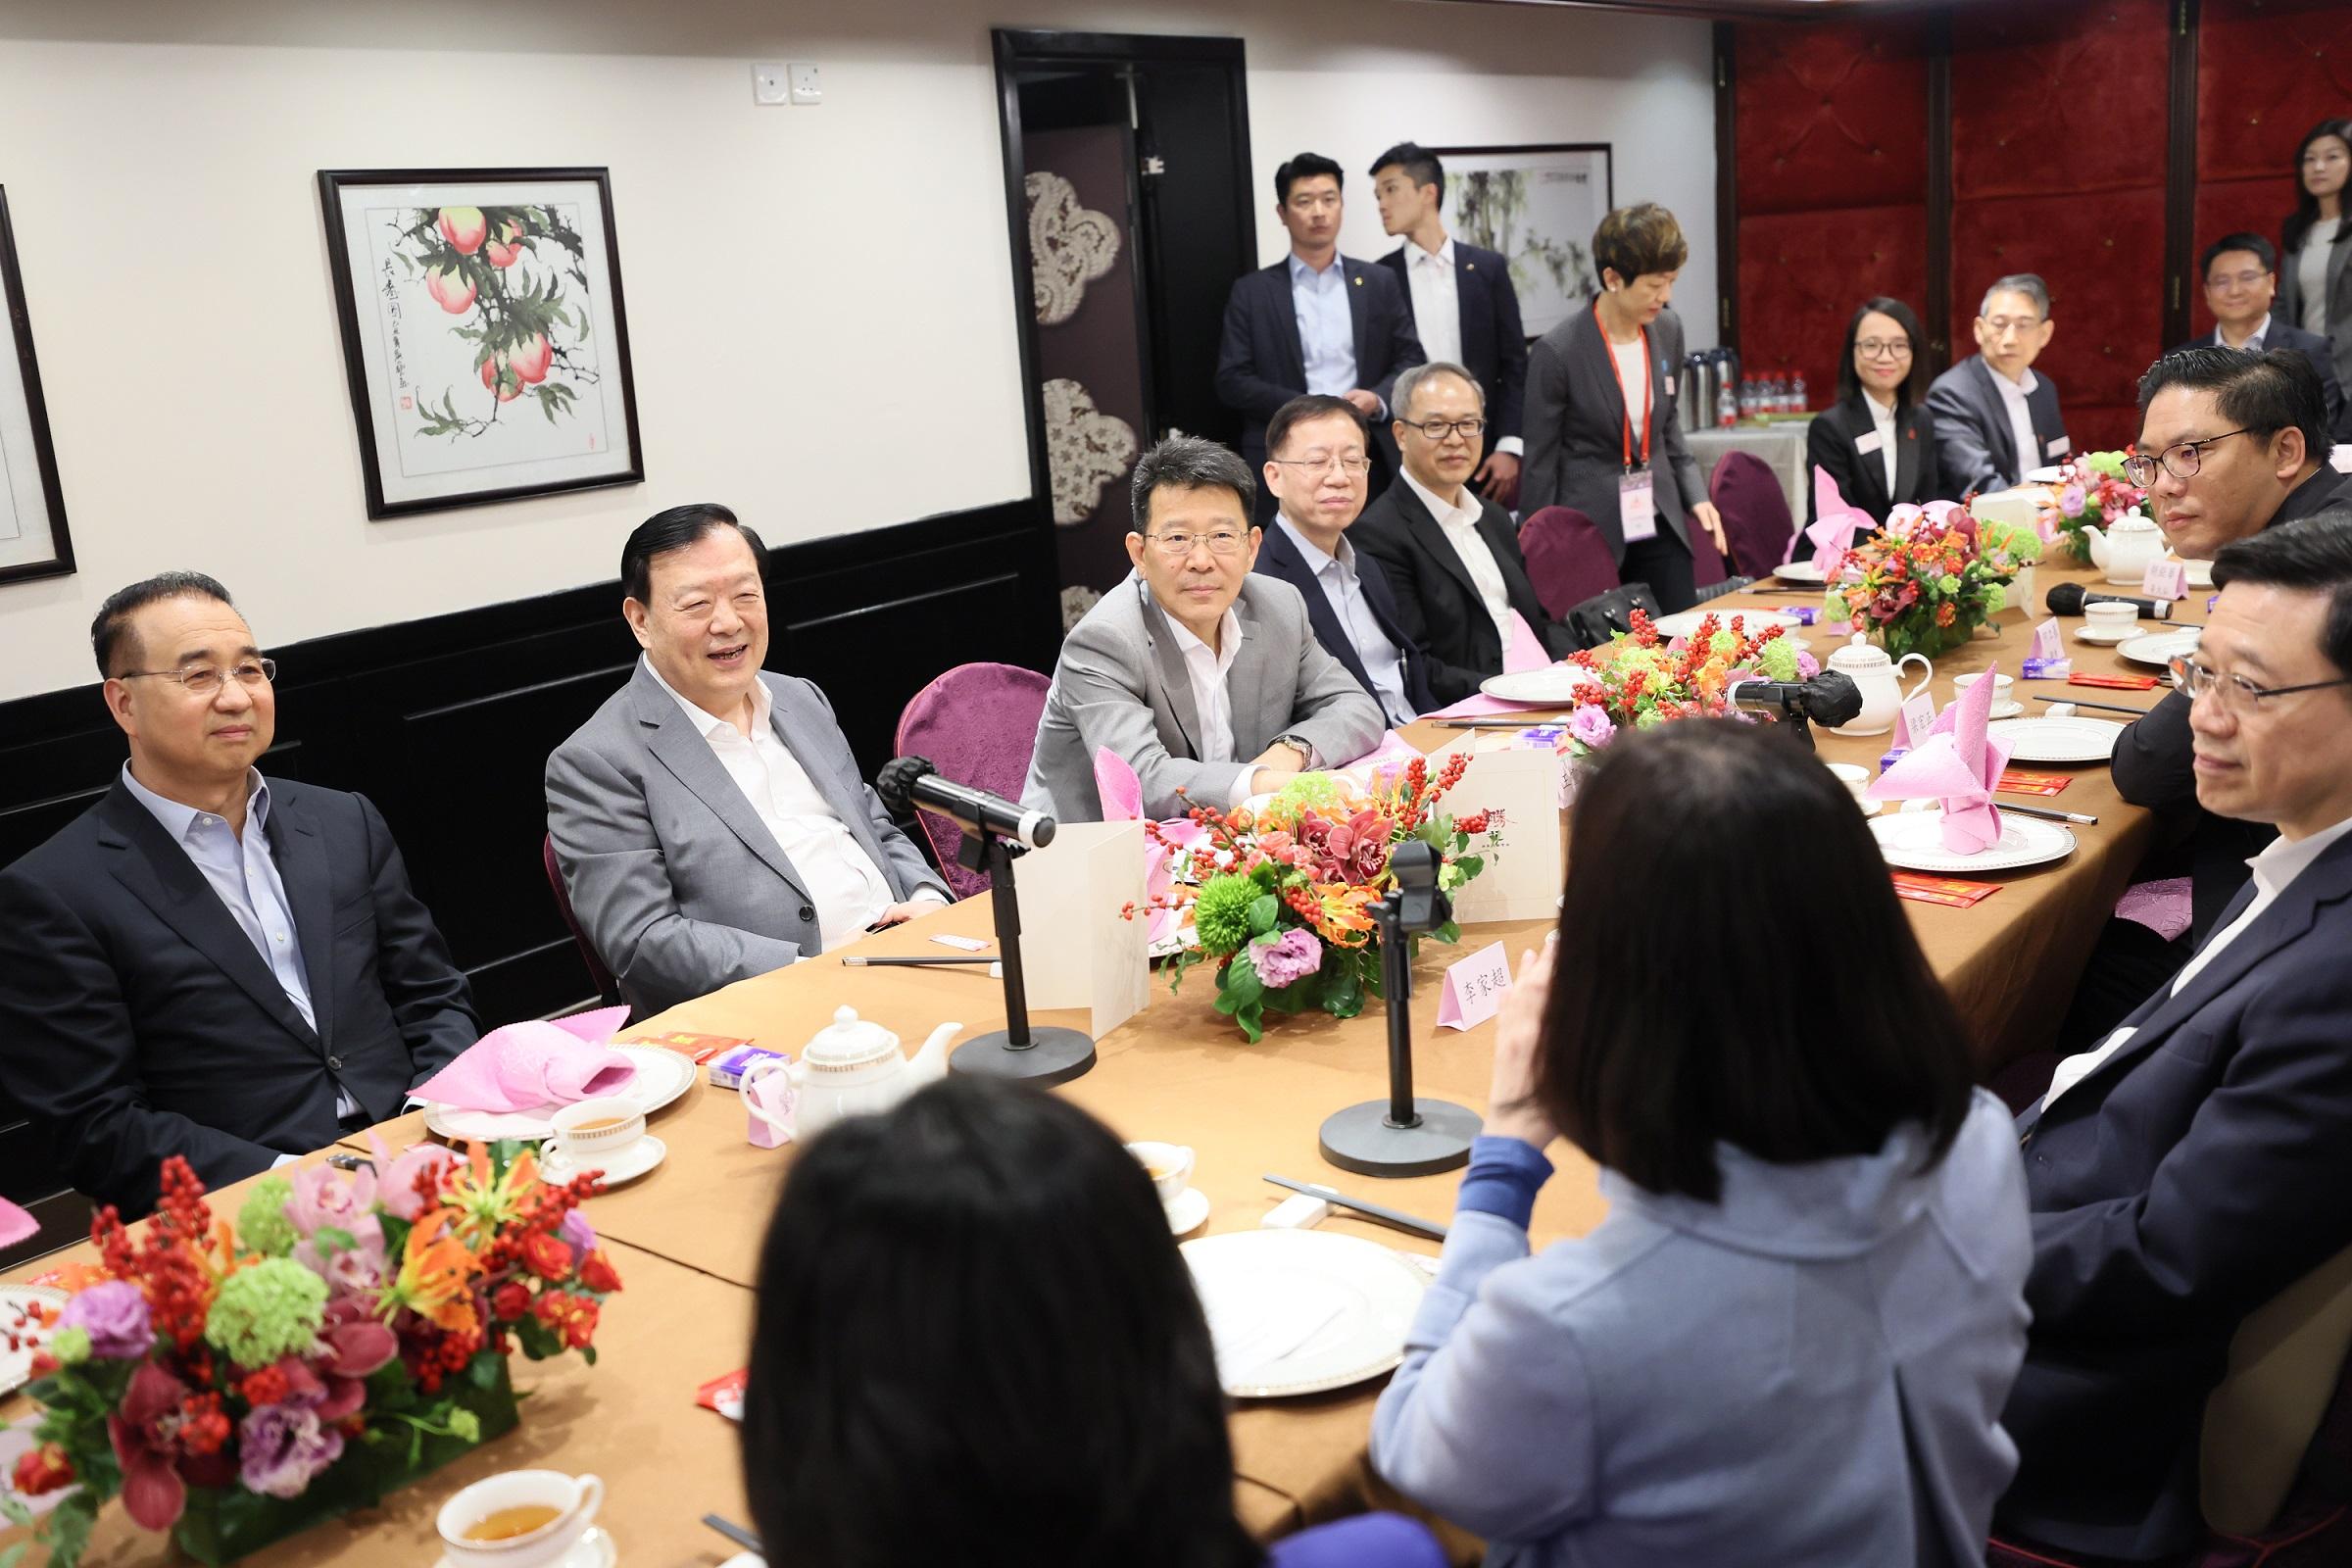 The Director of the Hong Kong and Macao Work Office of the Communist Party of China Central Committee and the Hong Kong and Macao Affairs Office of the State Council, Mr Xia Baolong, continued his inspection visit to Hong Kong and inspected the city's district governance today (February 24). Photo shows Mr Xia (second left) having a working lunch with the chairmen of the 18 District Councils to interact with them and exchange views on district governance issues.